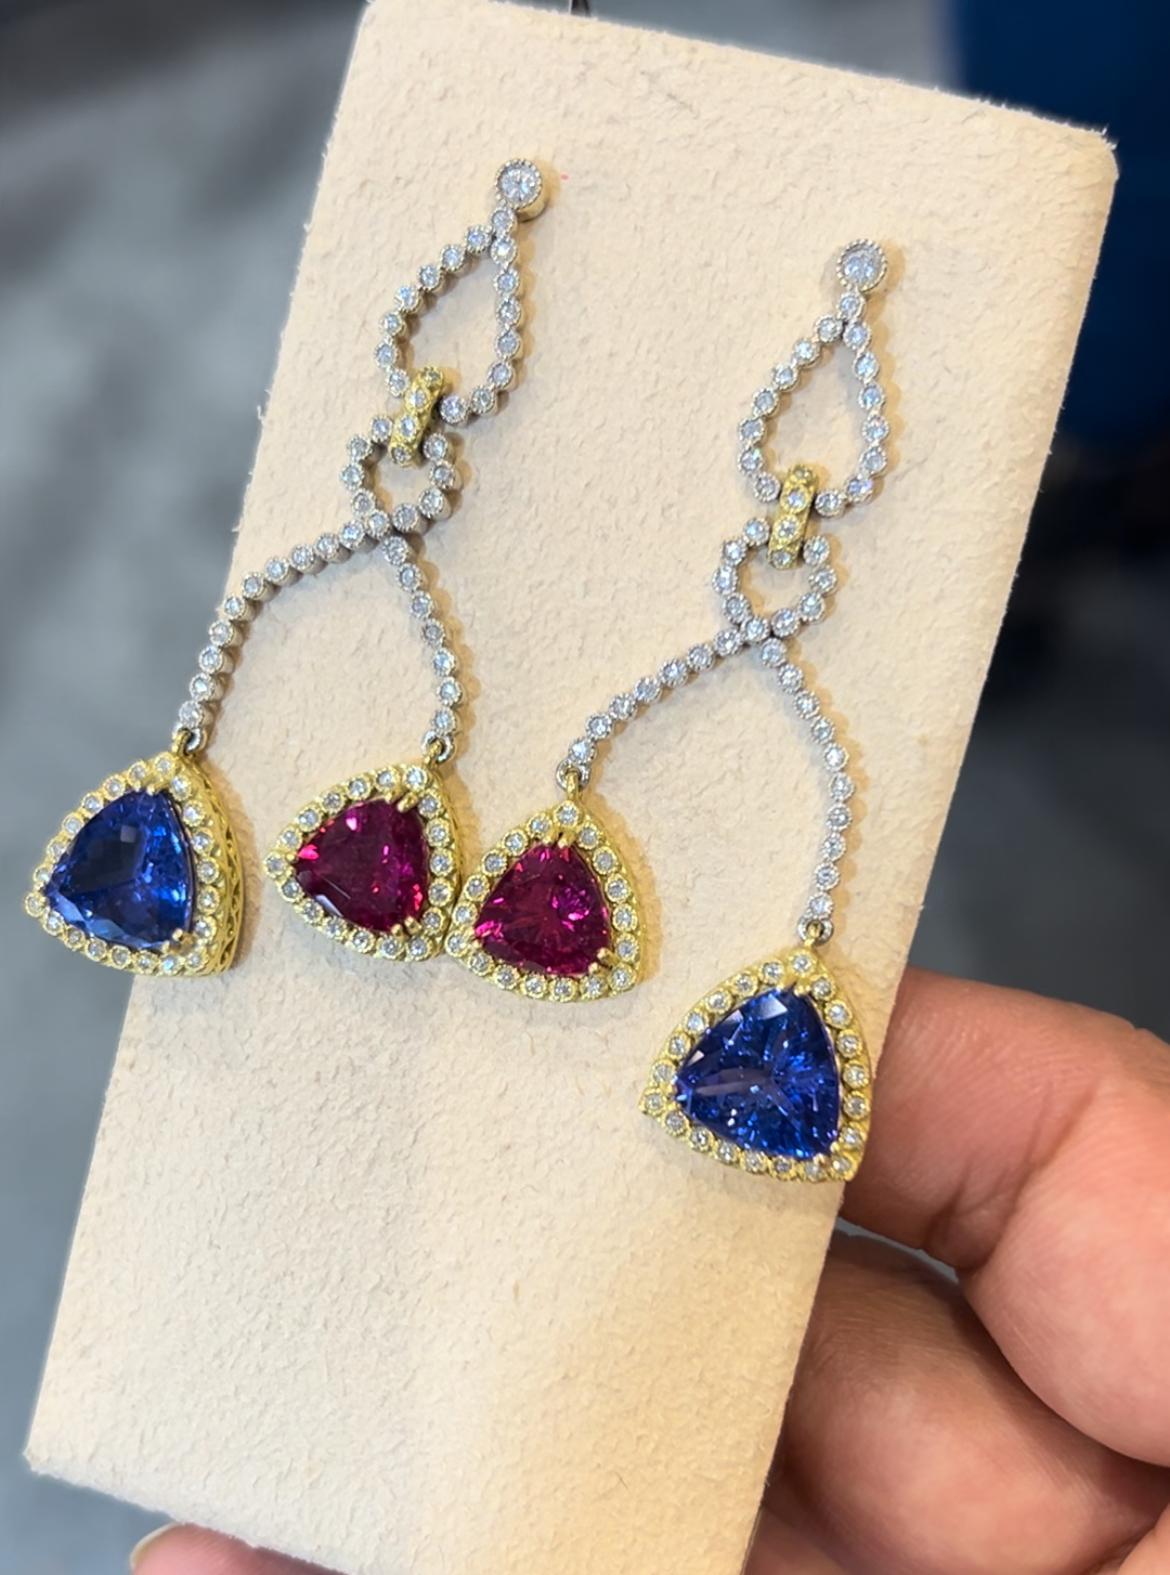 Trillion Cut Rubellite and Tanzanite Earrings. 13.70 carats. For Sale